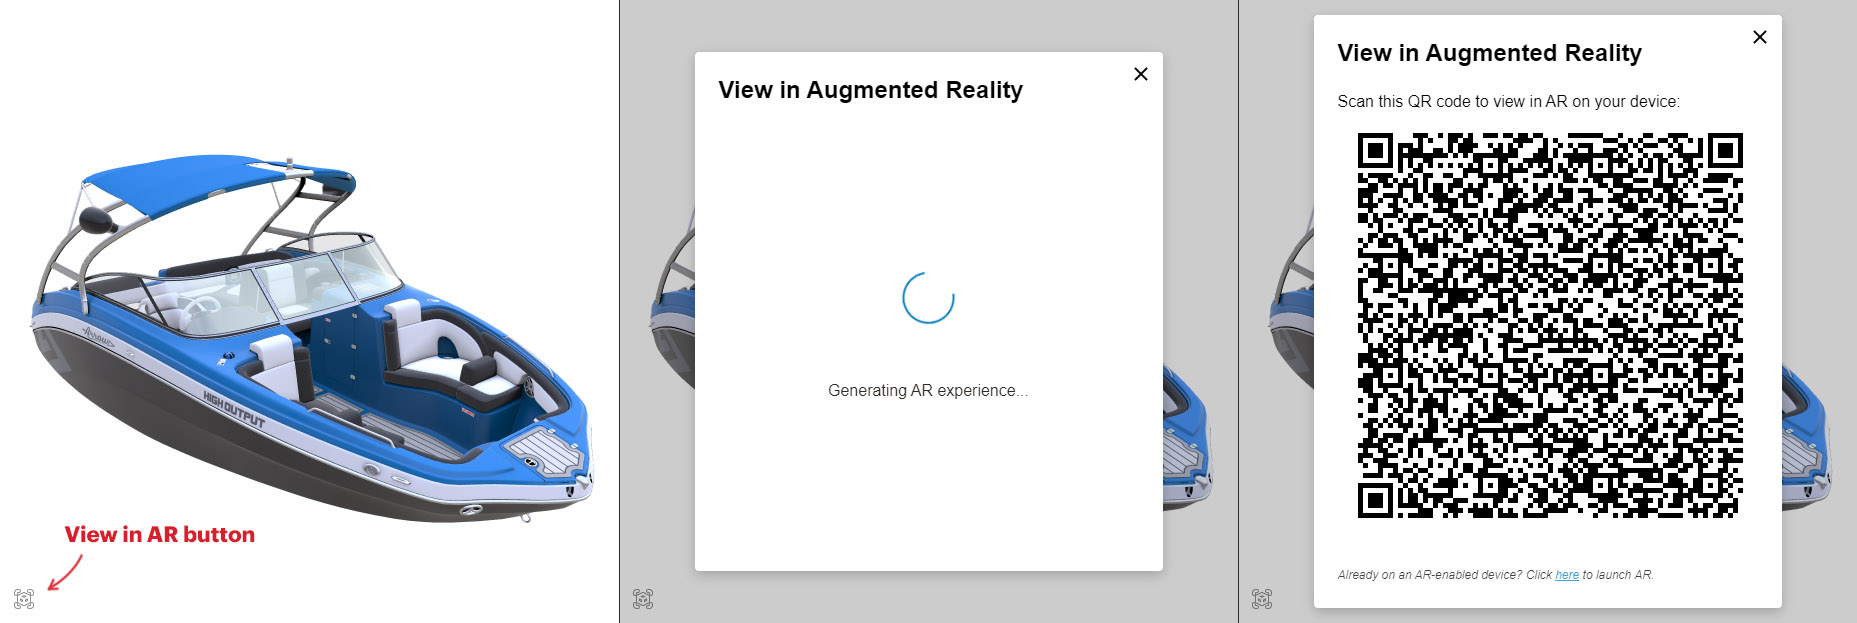 View in AR button within the Visual Component&#39;s Embedded UI